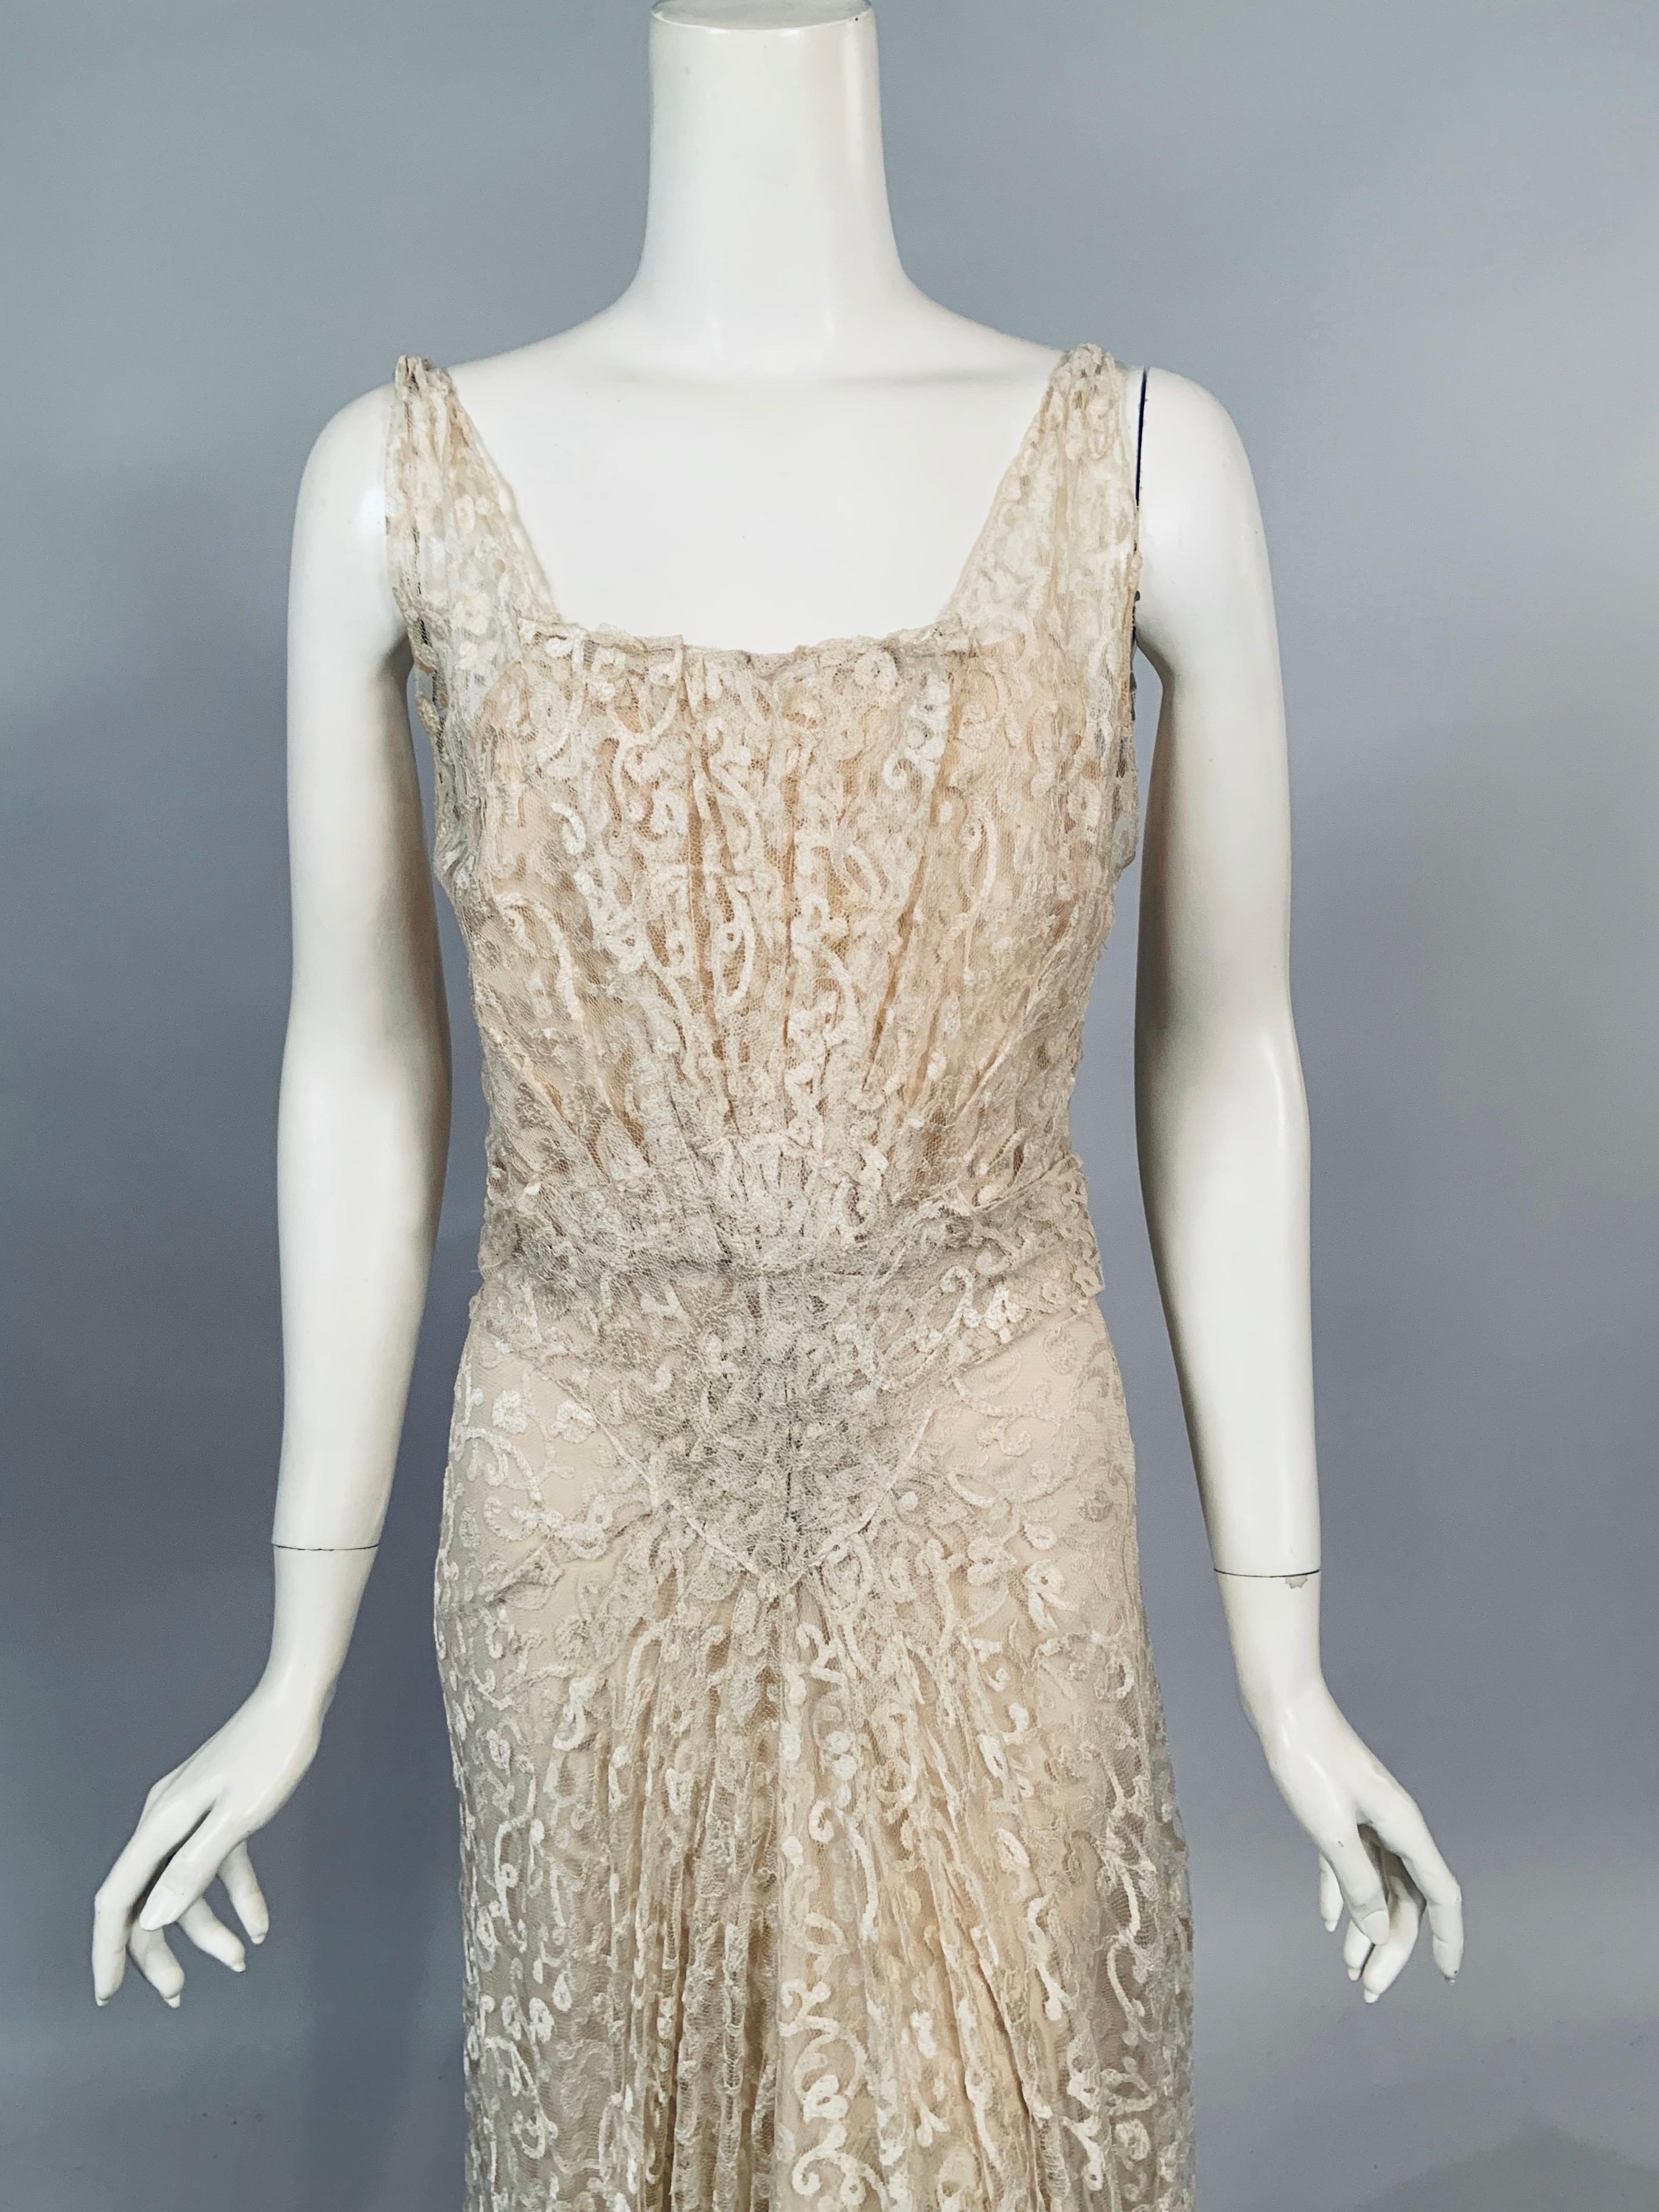 Feminine ivory cotton lace in a tone on tone swirling design is used for this 1930's bias cut evening gown and
matching slip with the Biaolo, Paris label. The dress has narrow straps, a pleated bodice with a square neckline in front and a V shaped